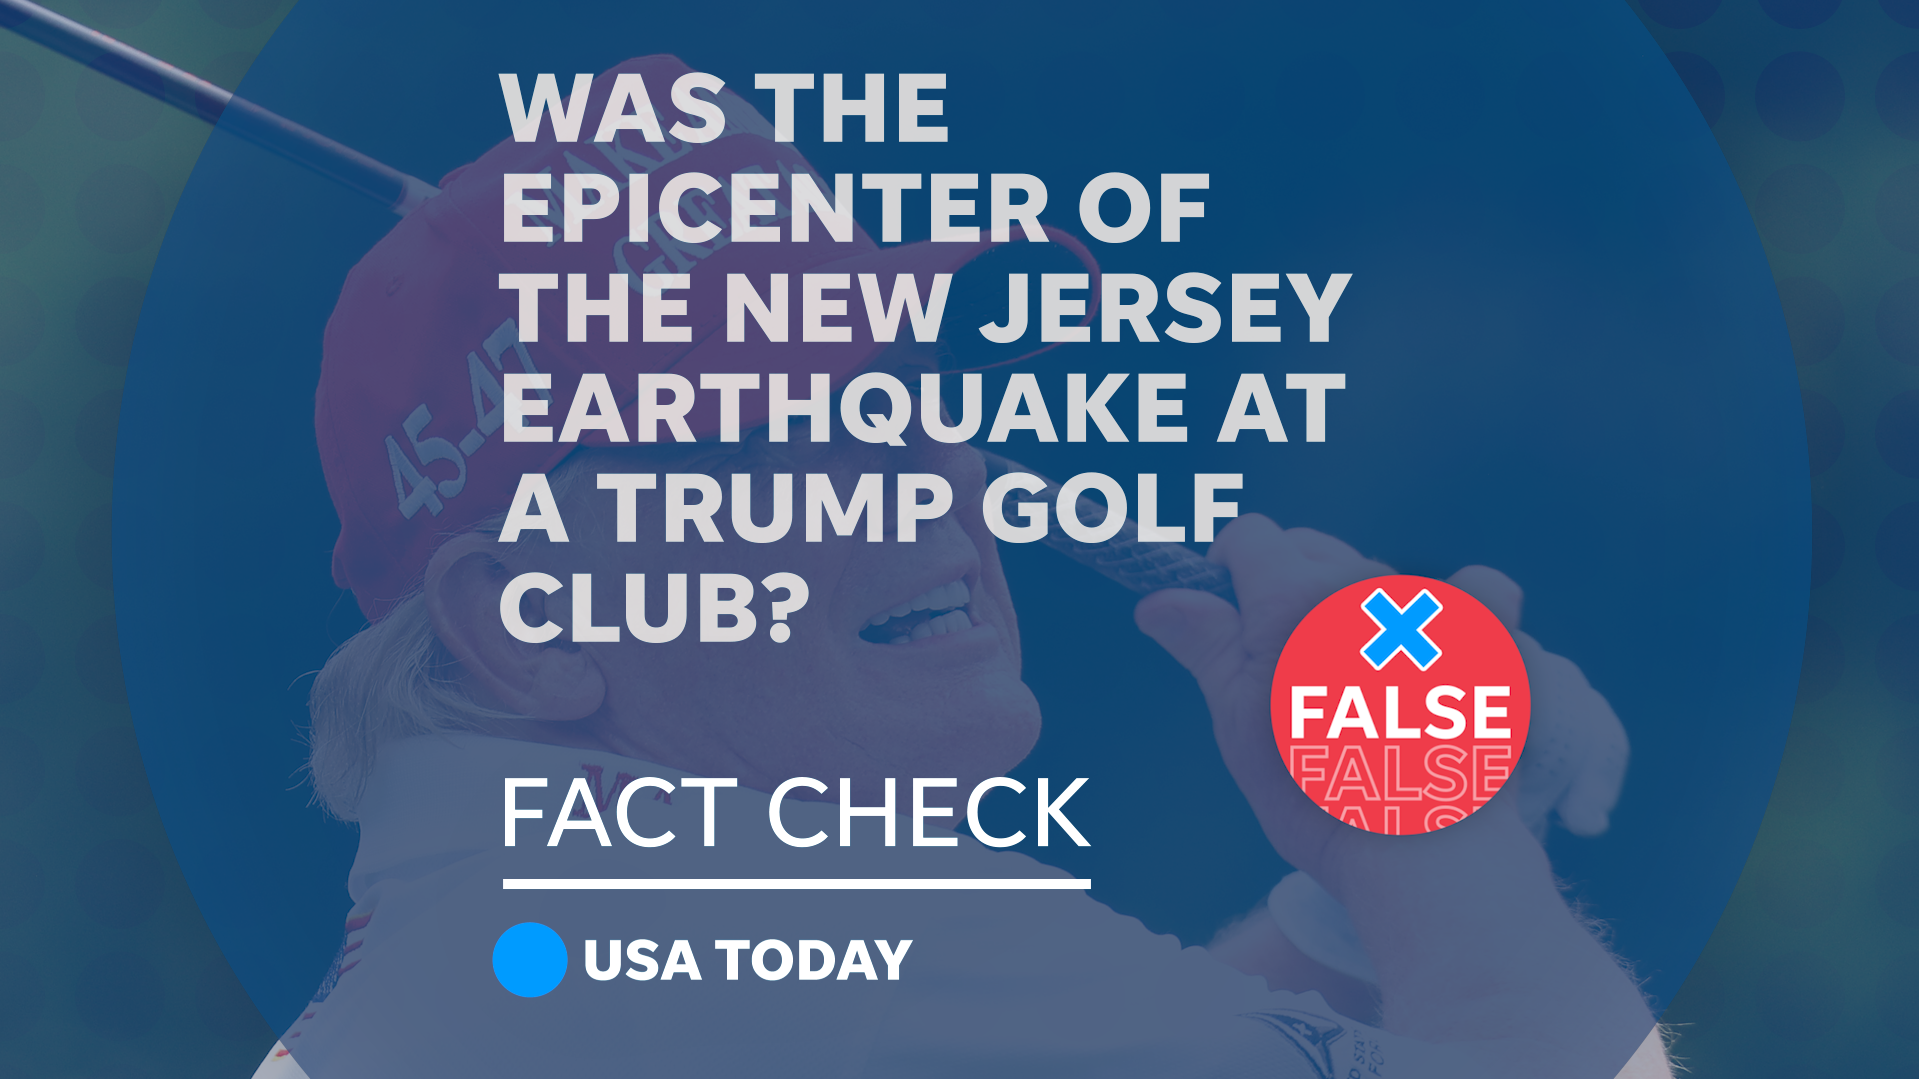 FACT CHECK: Trump's golf club was not the epicenter of the New Jersey earthquake